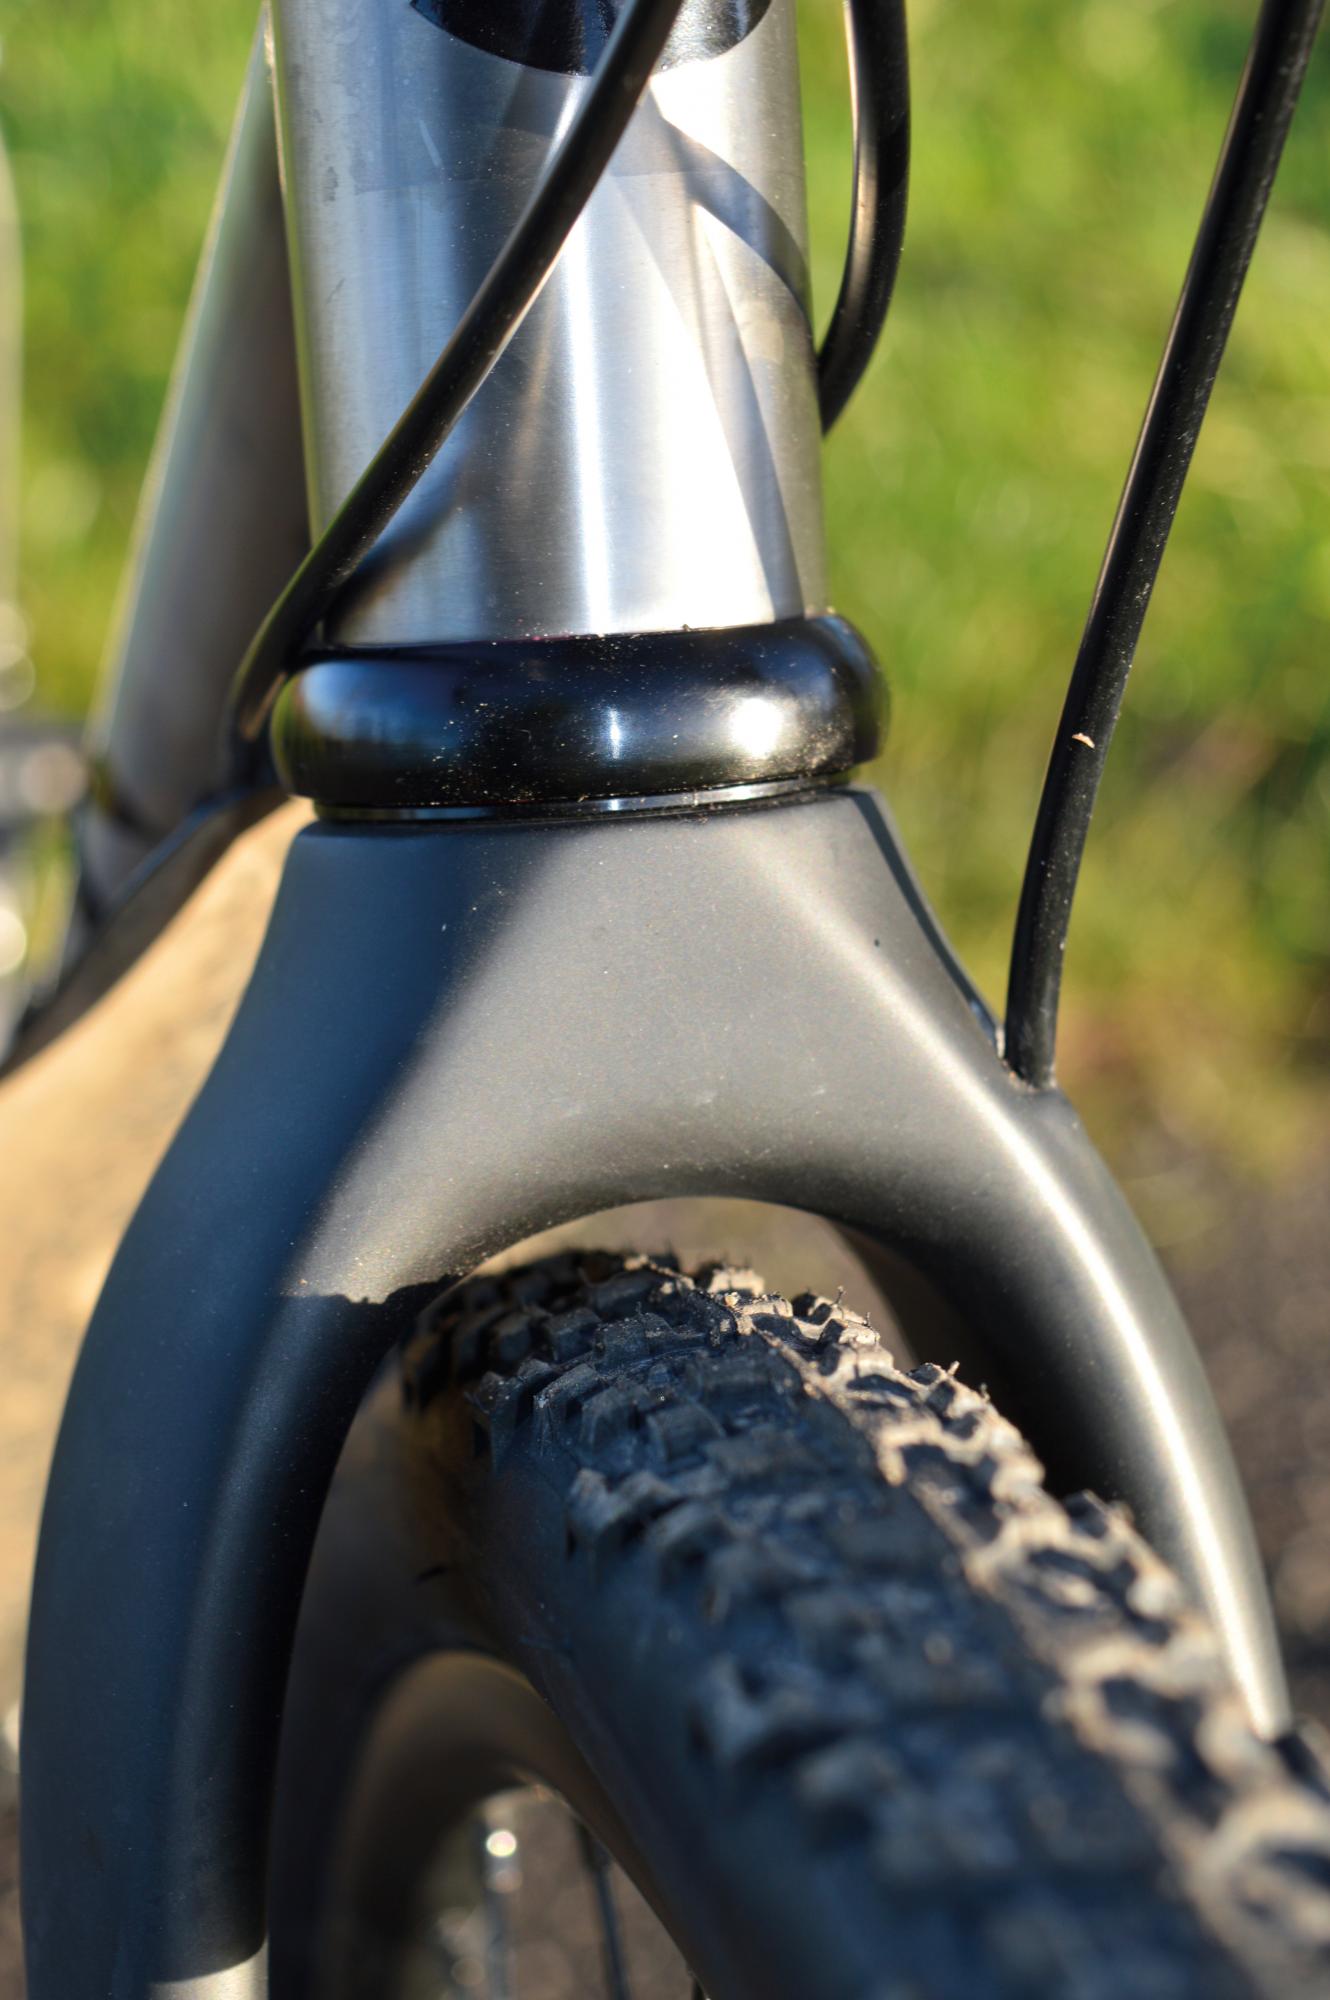 Tight clearance and no hole in the fork crown. If you want a mudguard, ask for the Camino Al fork instead.